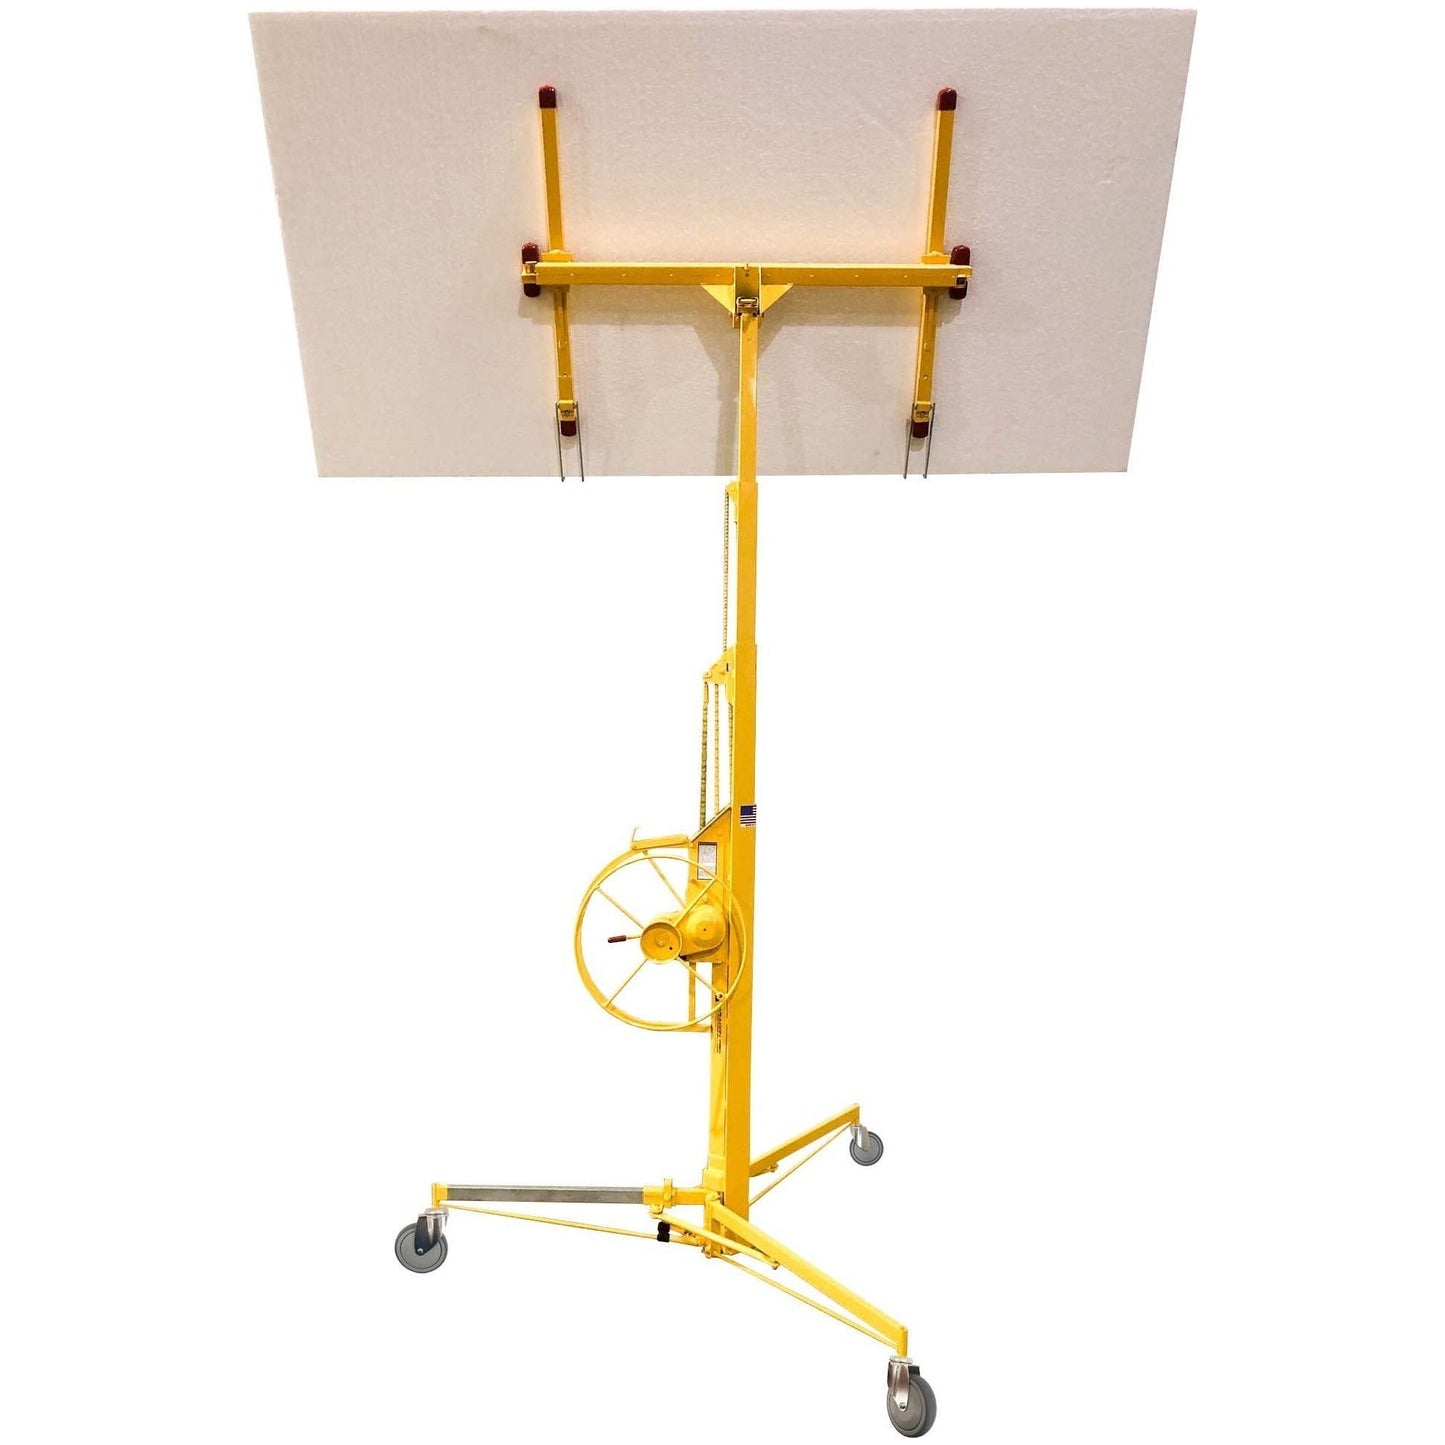 Panellift® Drywall Lift Model 439 - Paragon Pro Manufacturing Solutions Inc.